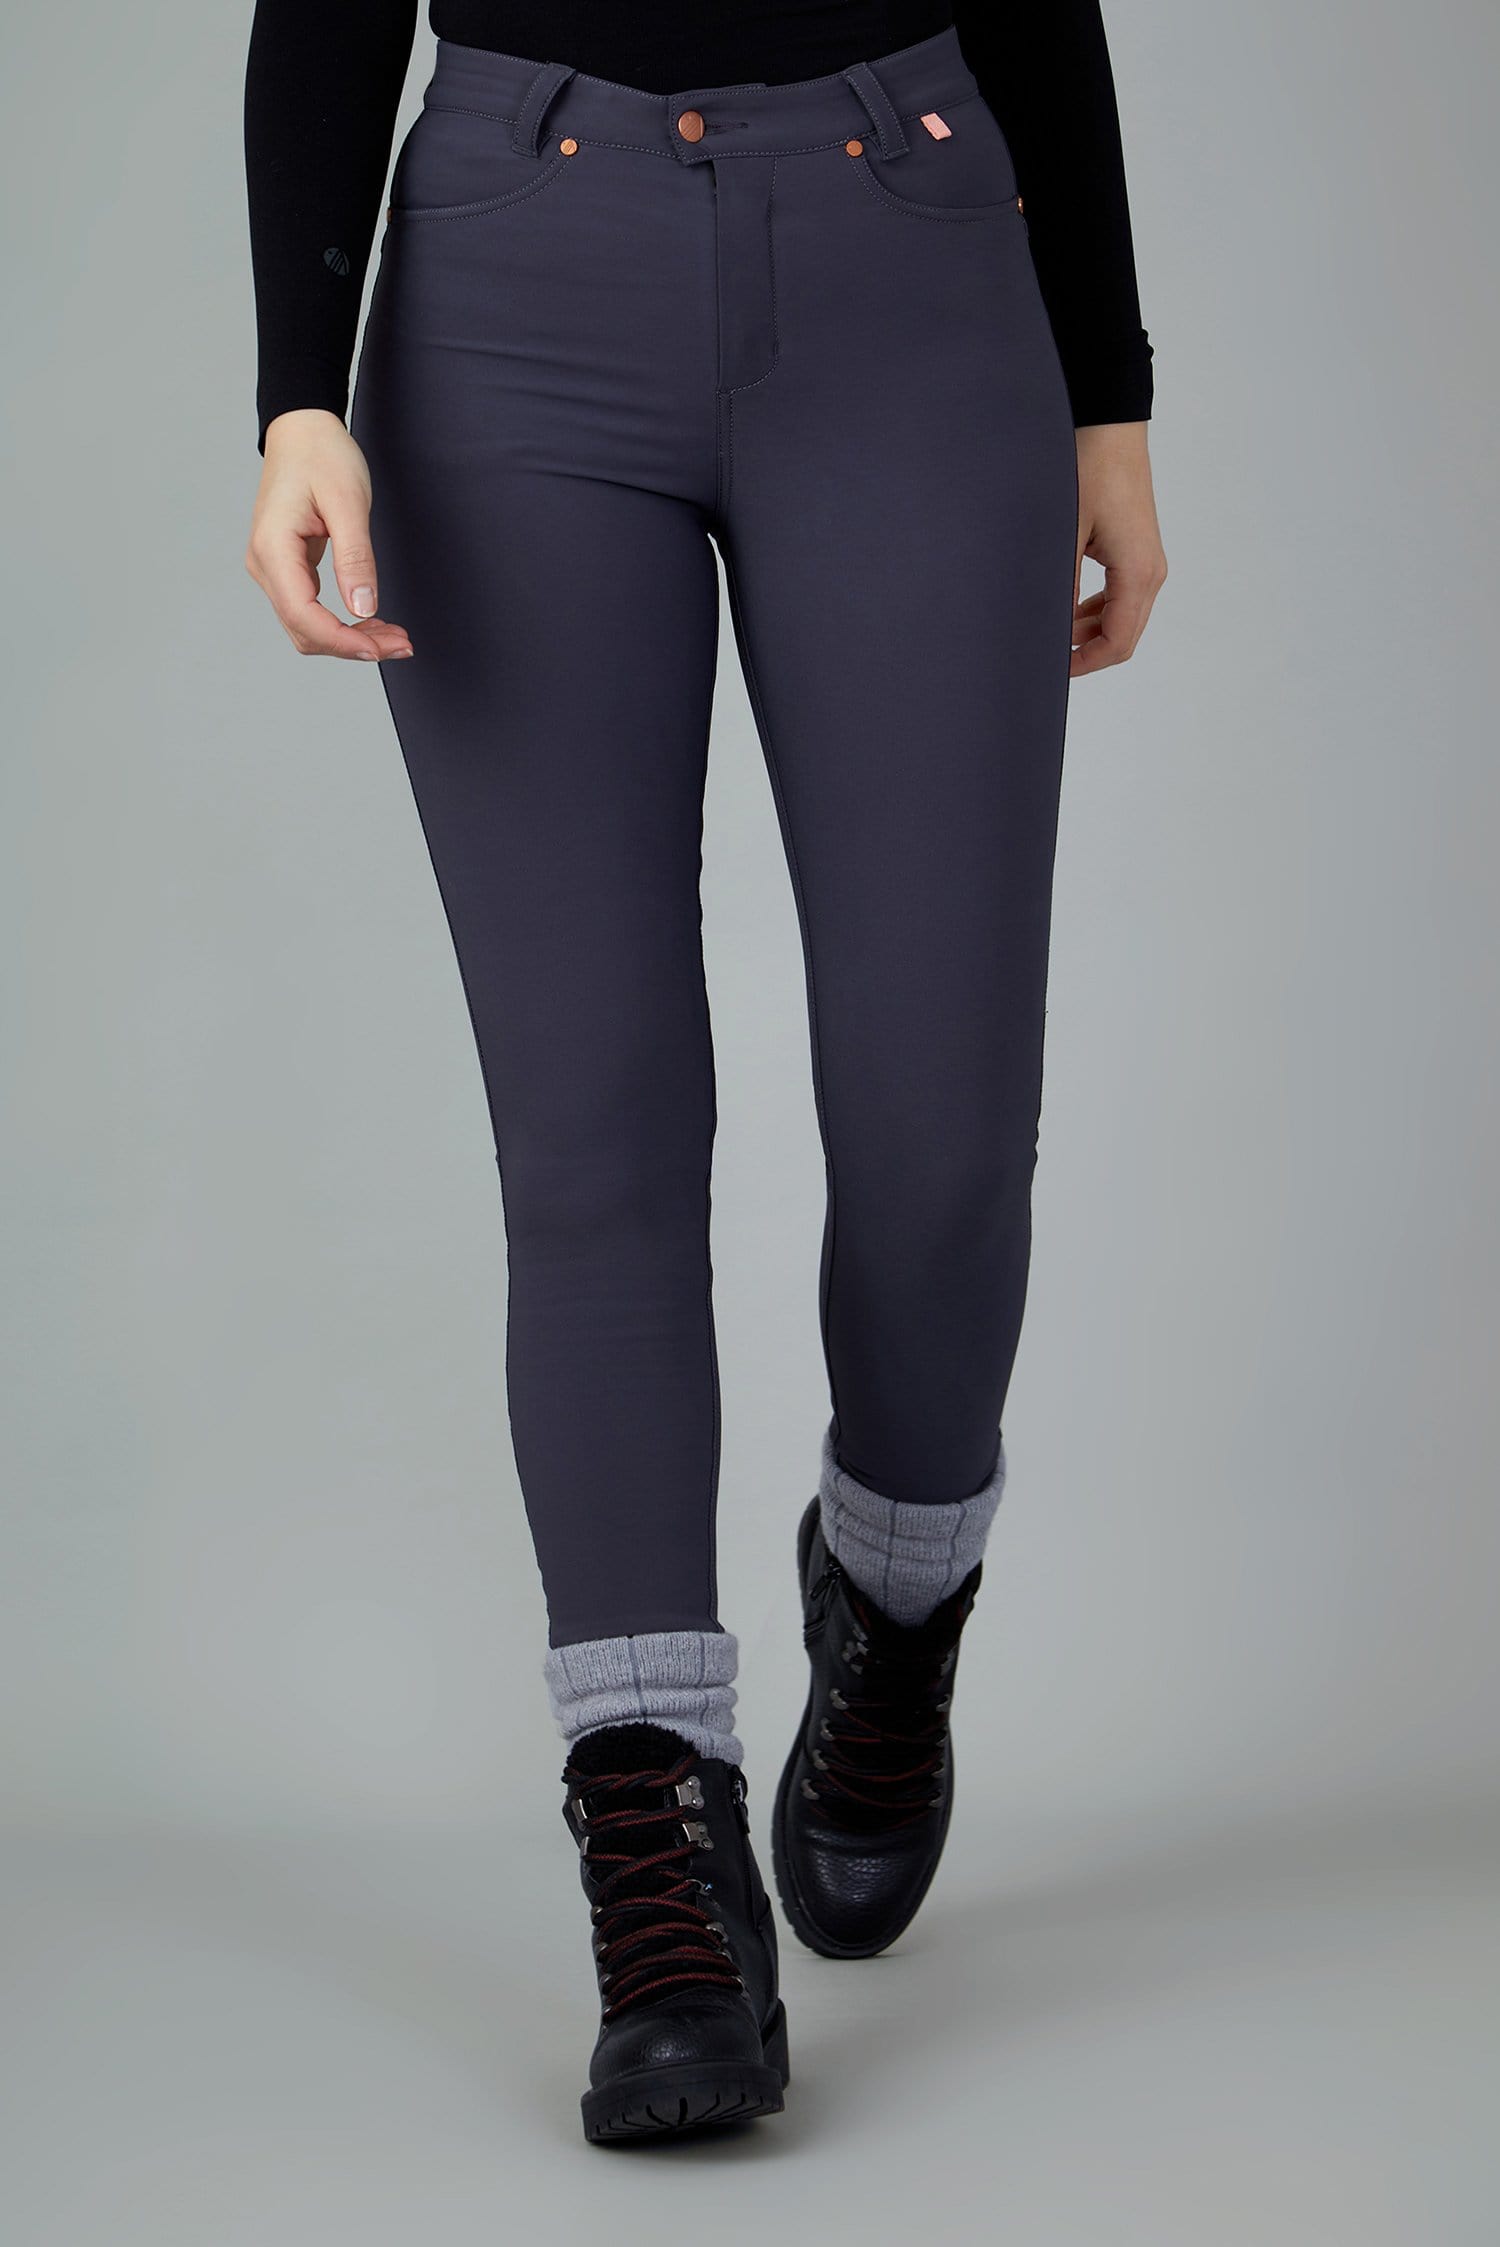 The Aventurite Stretch Skinny Outdoor Trousers - Obsidian - 34xl / Uk16 - Womens - Acai Outdoorwear